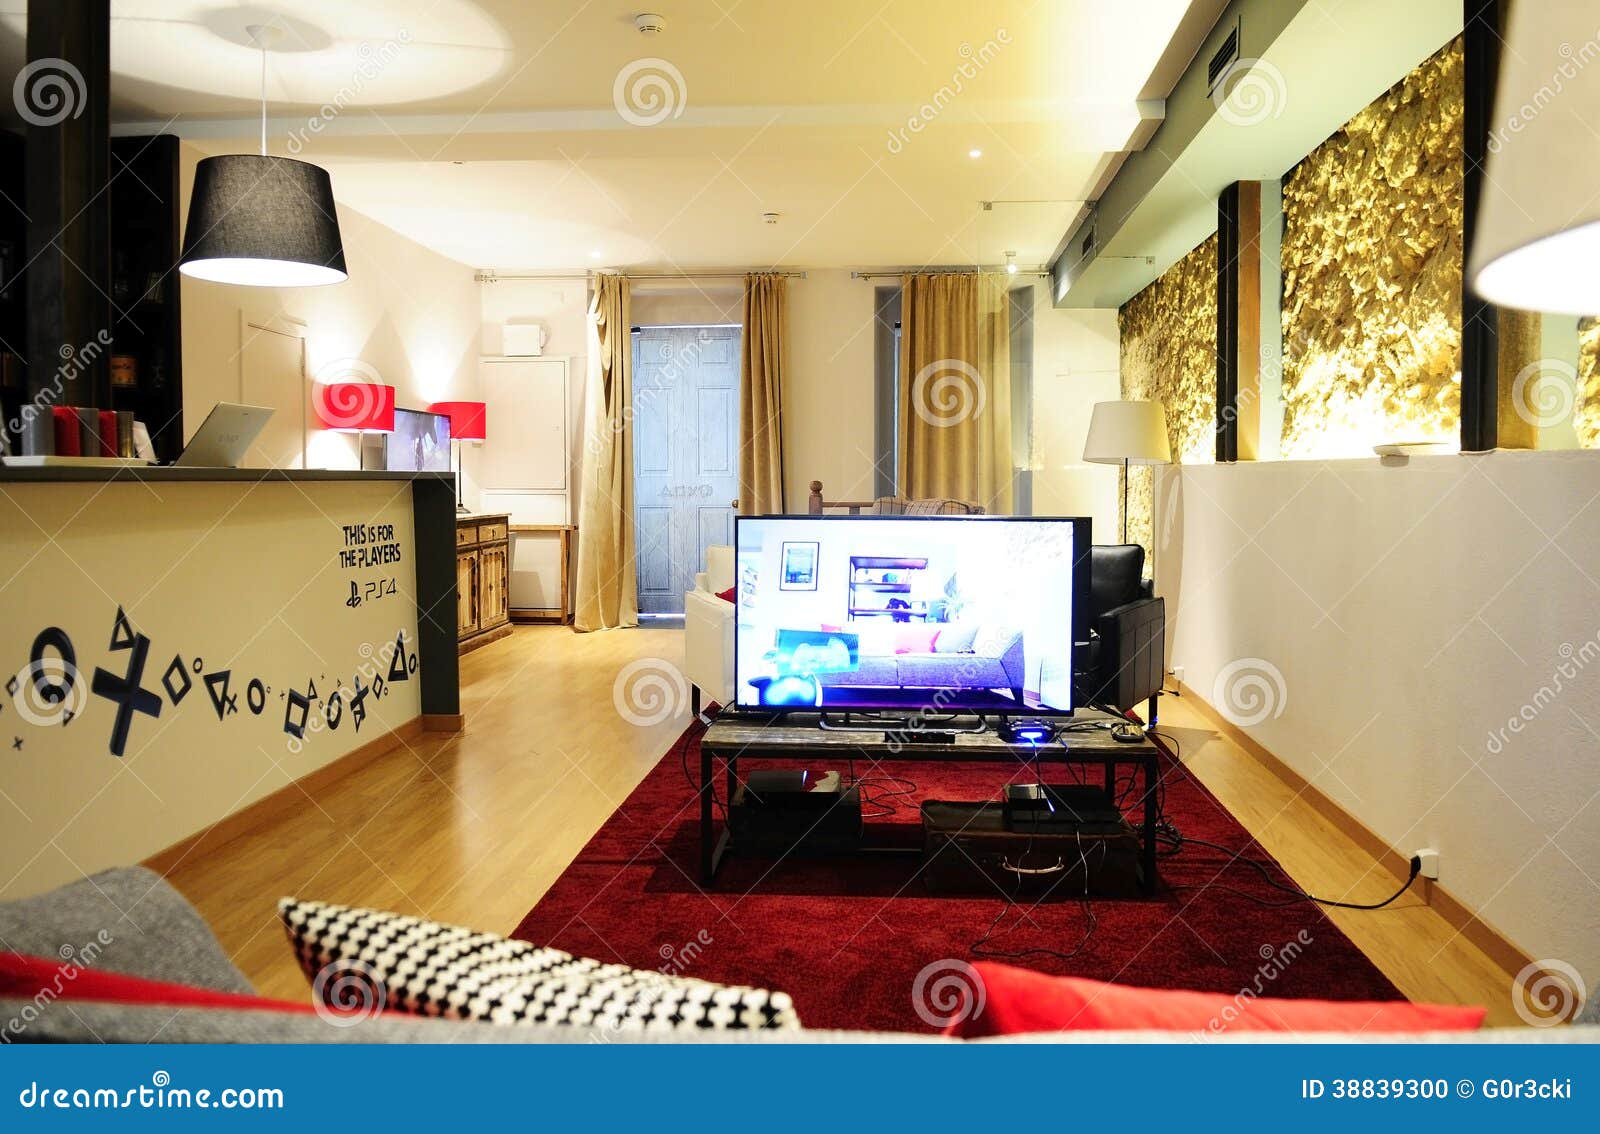  PlayStation  Portugal Video Games  Room Home  Editorial 